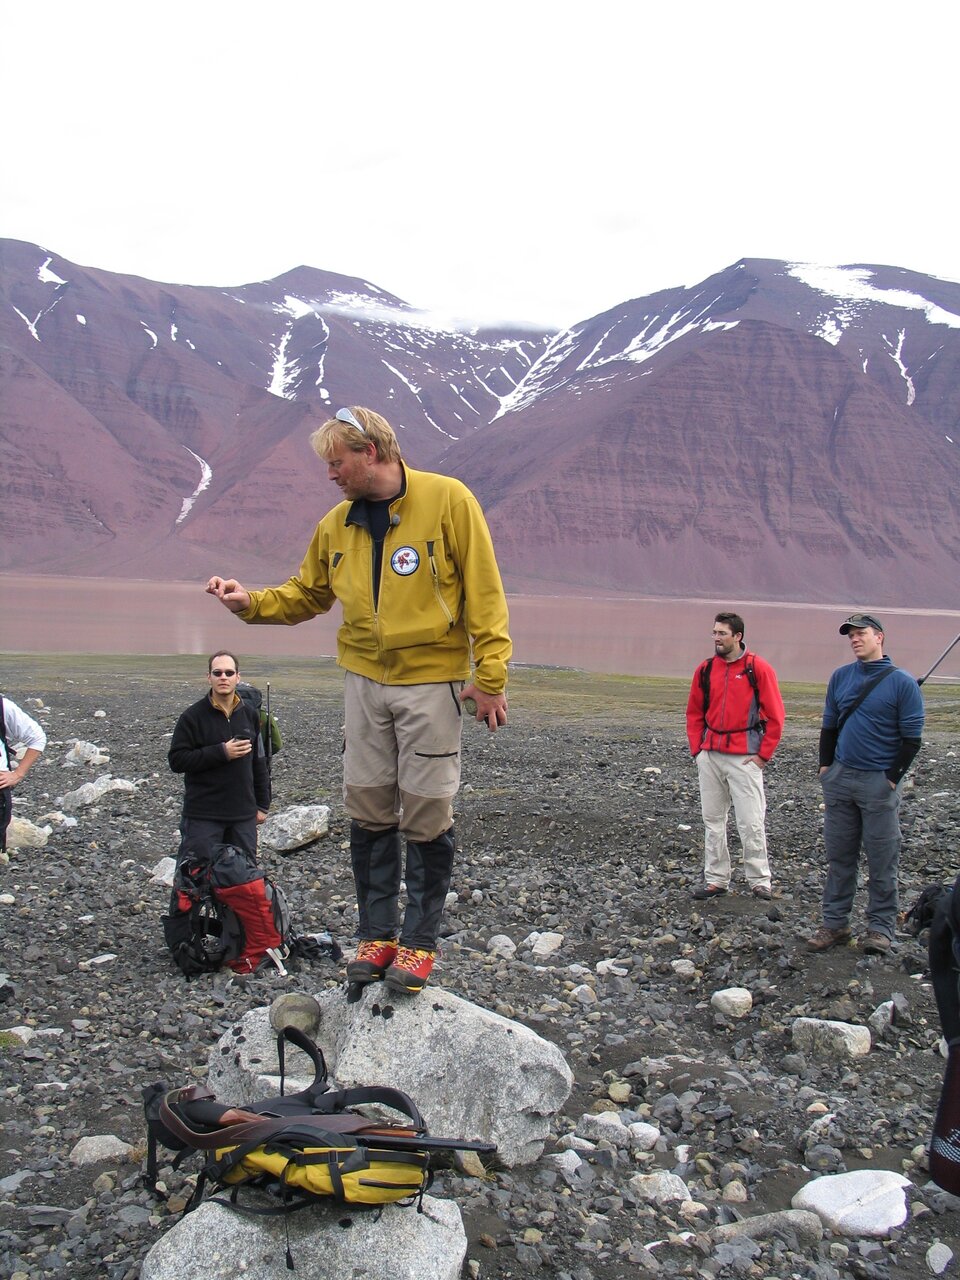 Geology 'lecture' given by our expedition leader, Hans Amundsen